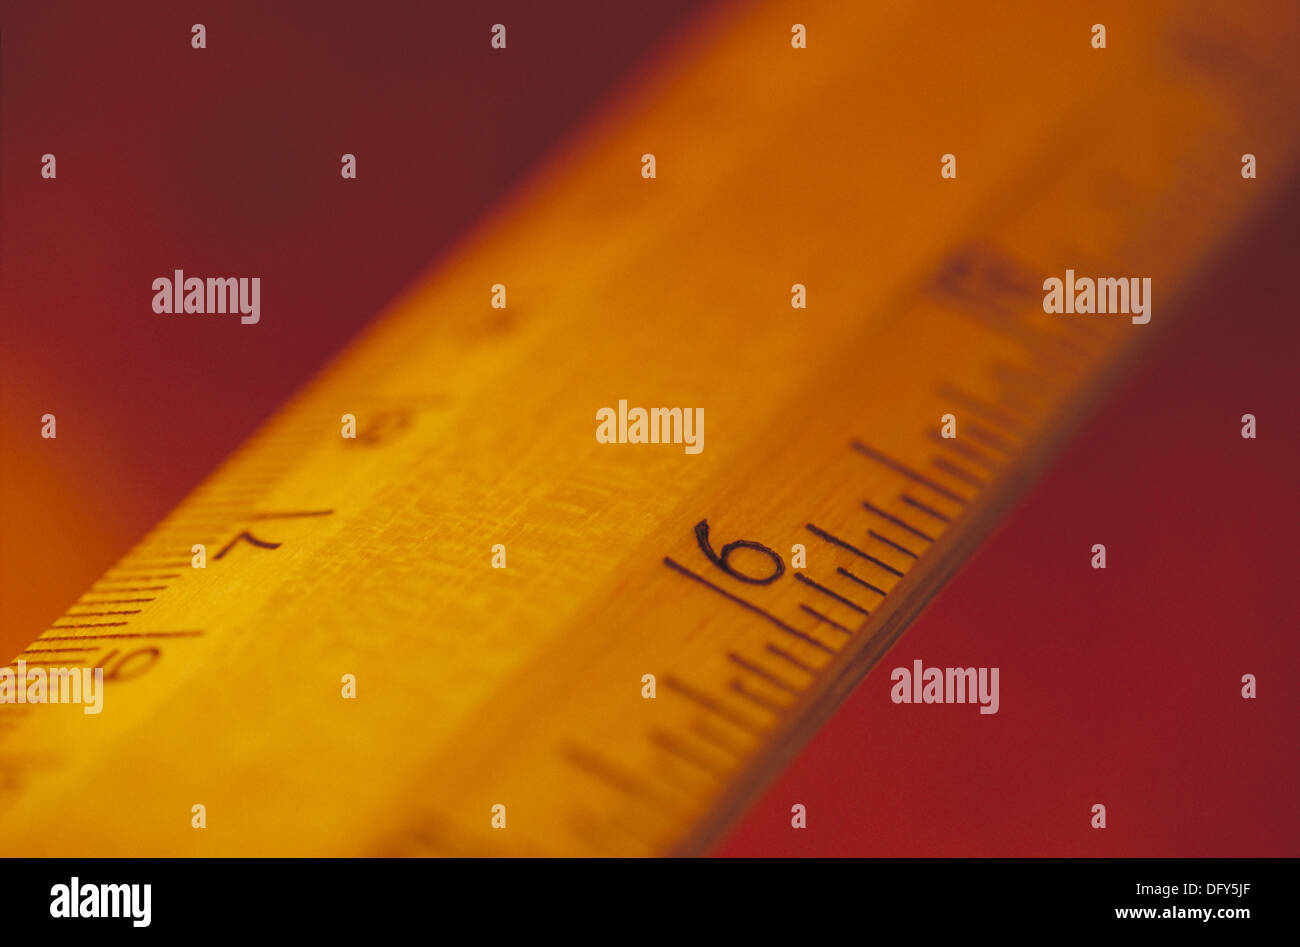 Ruler showing centimeters and inches Stock Photo